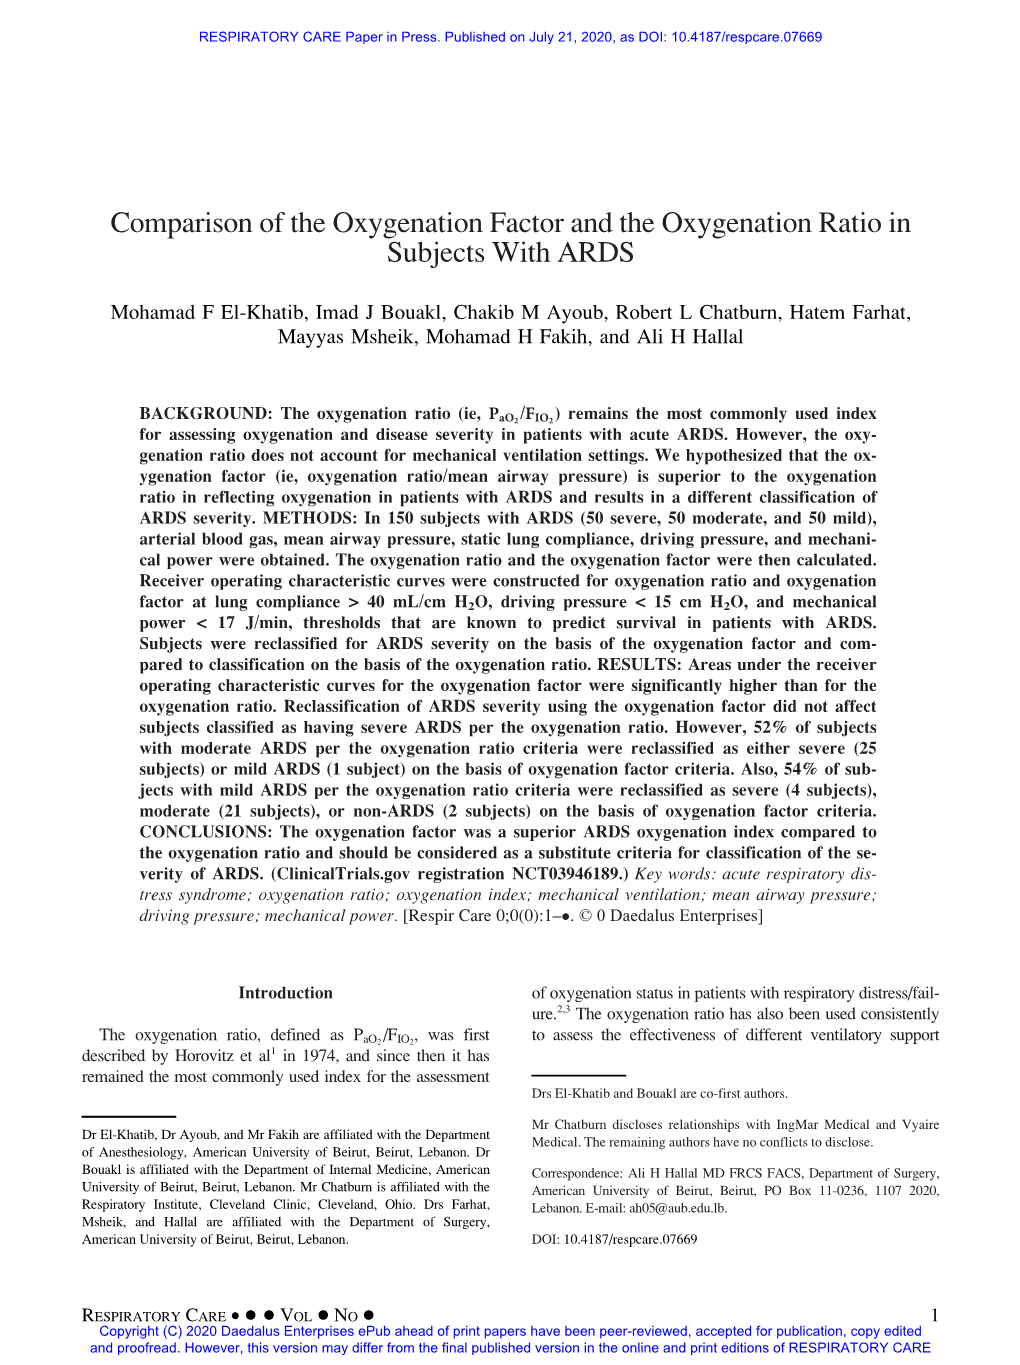 Comparison of the Oxygenation Factor and the Oxygenation Ratio in Subjects with ARDS